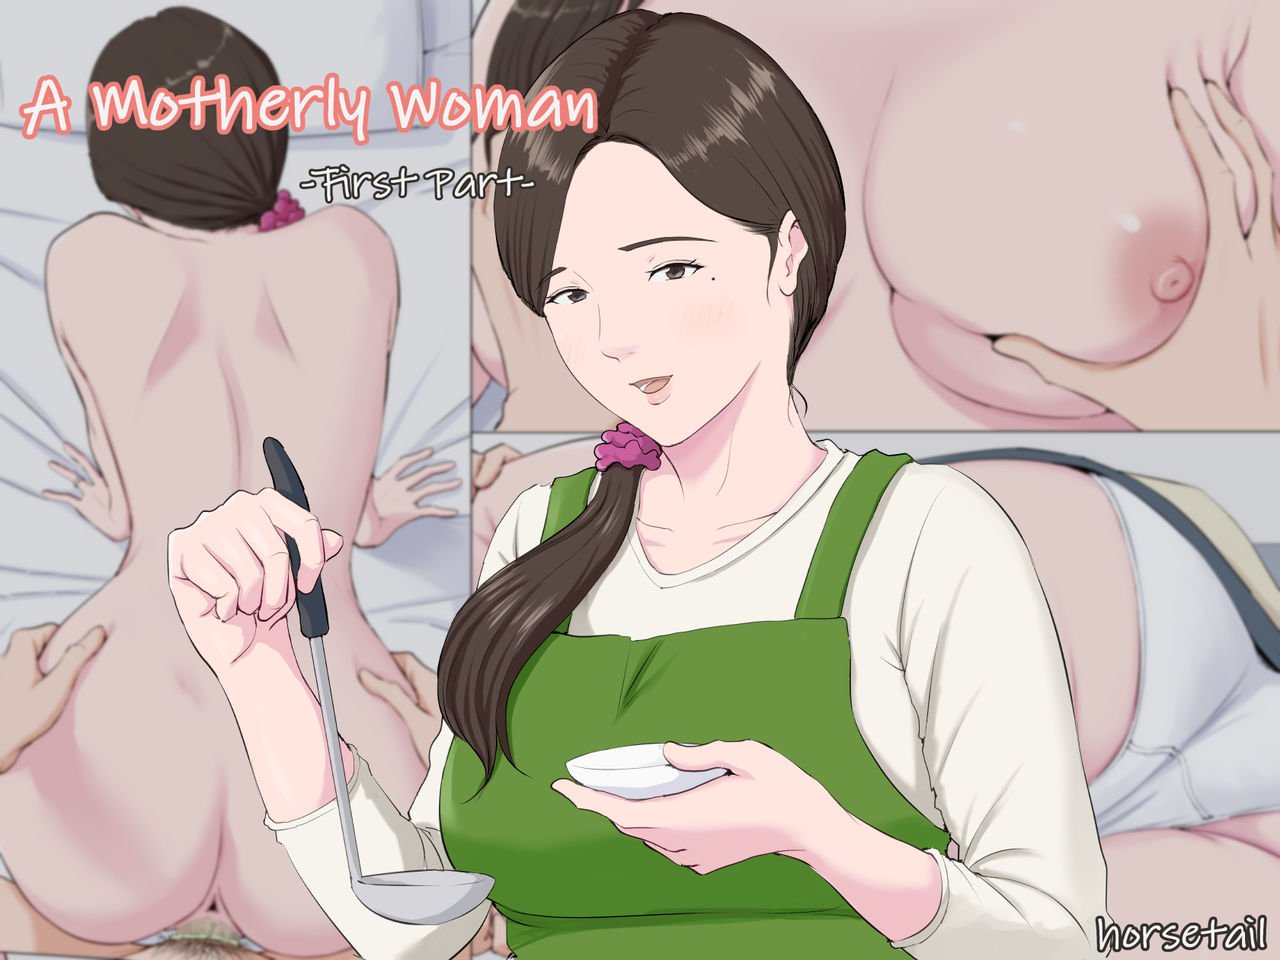 A Motherly Woman [Horsetail] - 1 . A Motherly Woman - Chapter 1 [Horsetail]  - AllPornComic